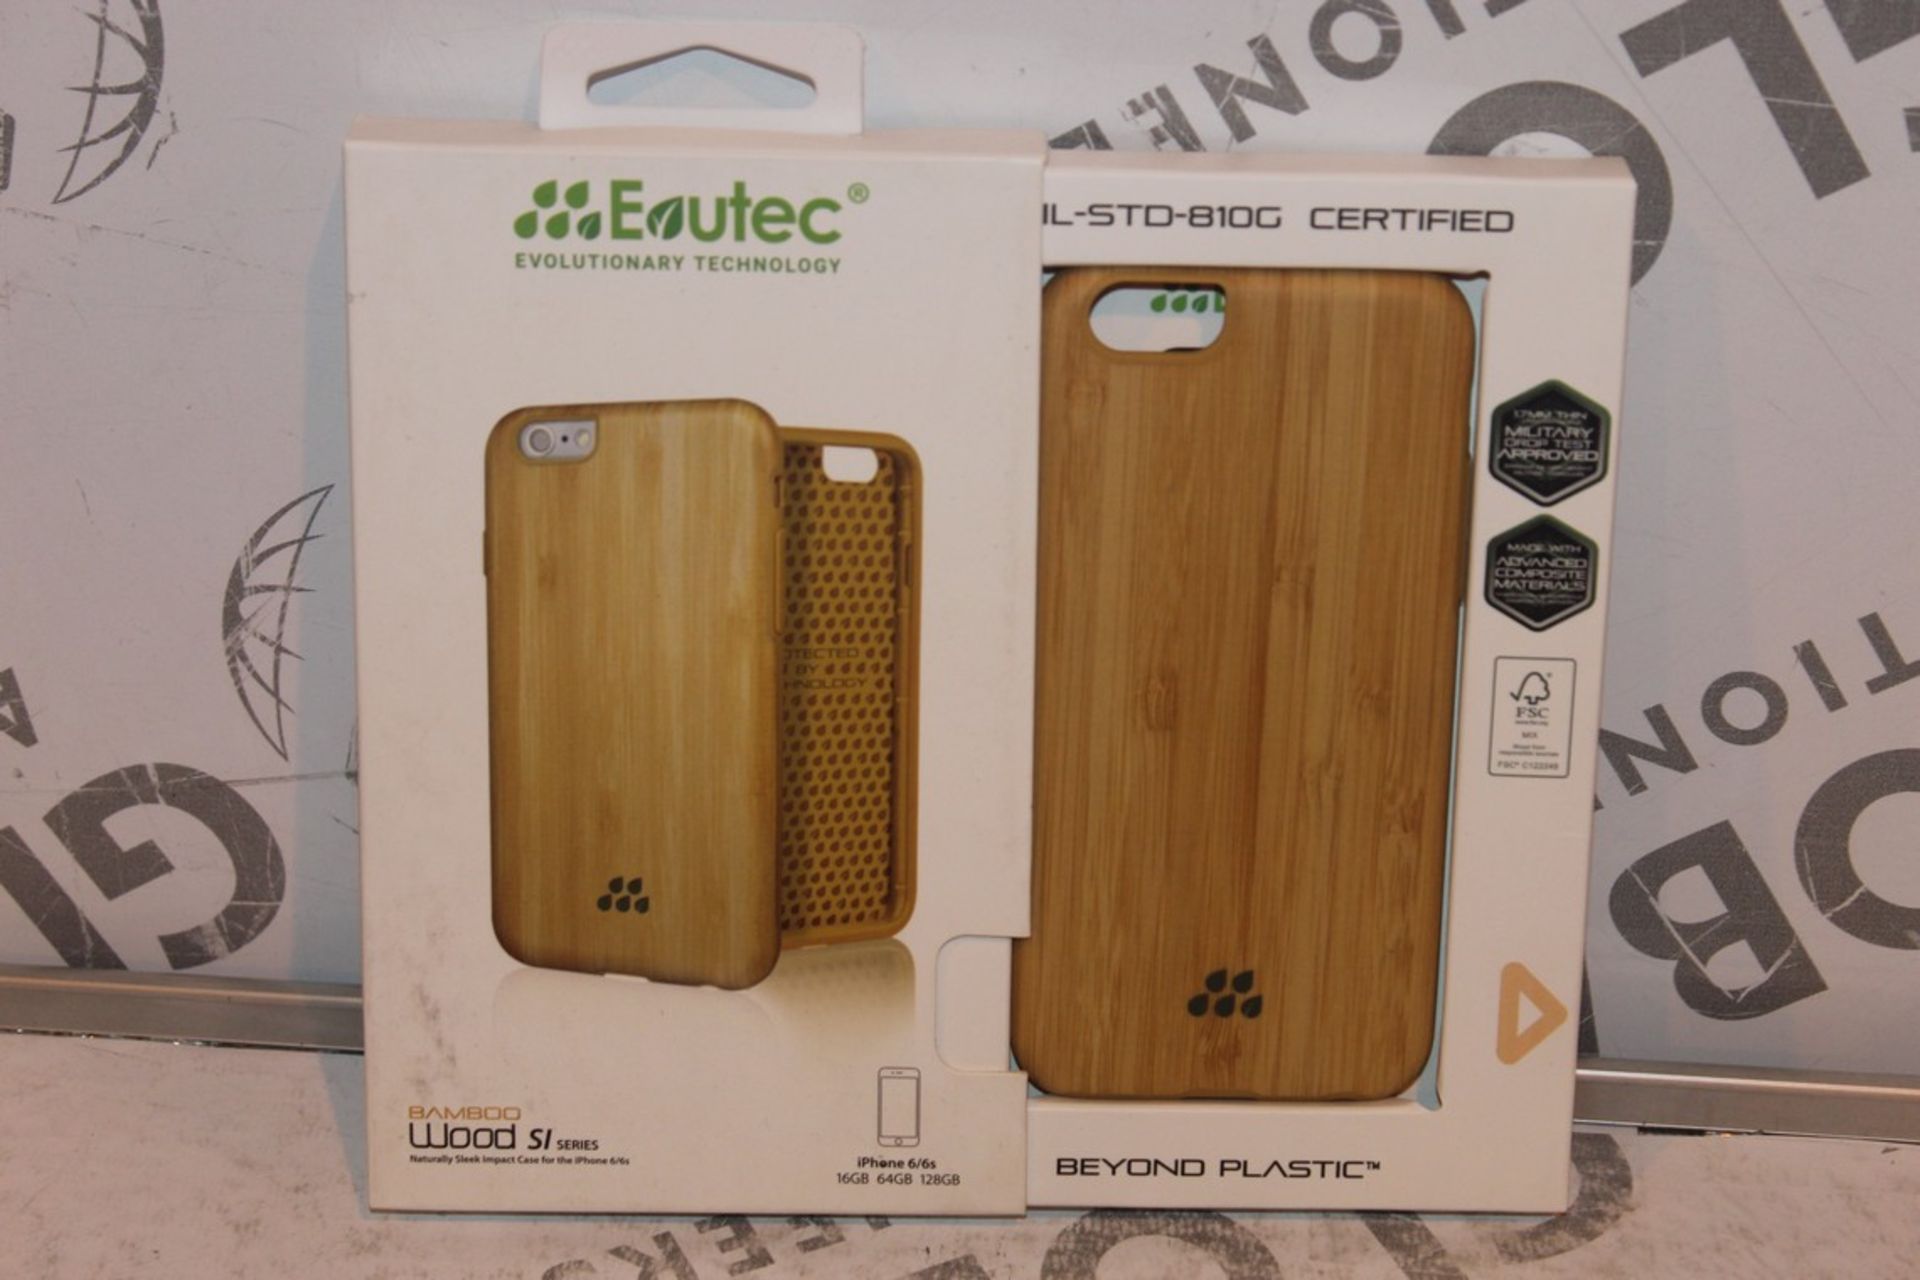 Lot to Contain 90 Brand New Evutec Evolutionary Technology Bamboo Wood Series Iphone 6 and 6S